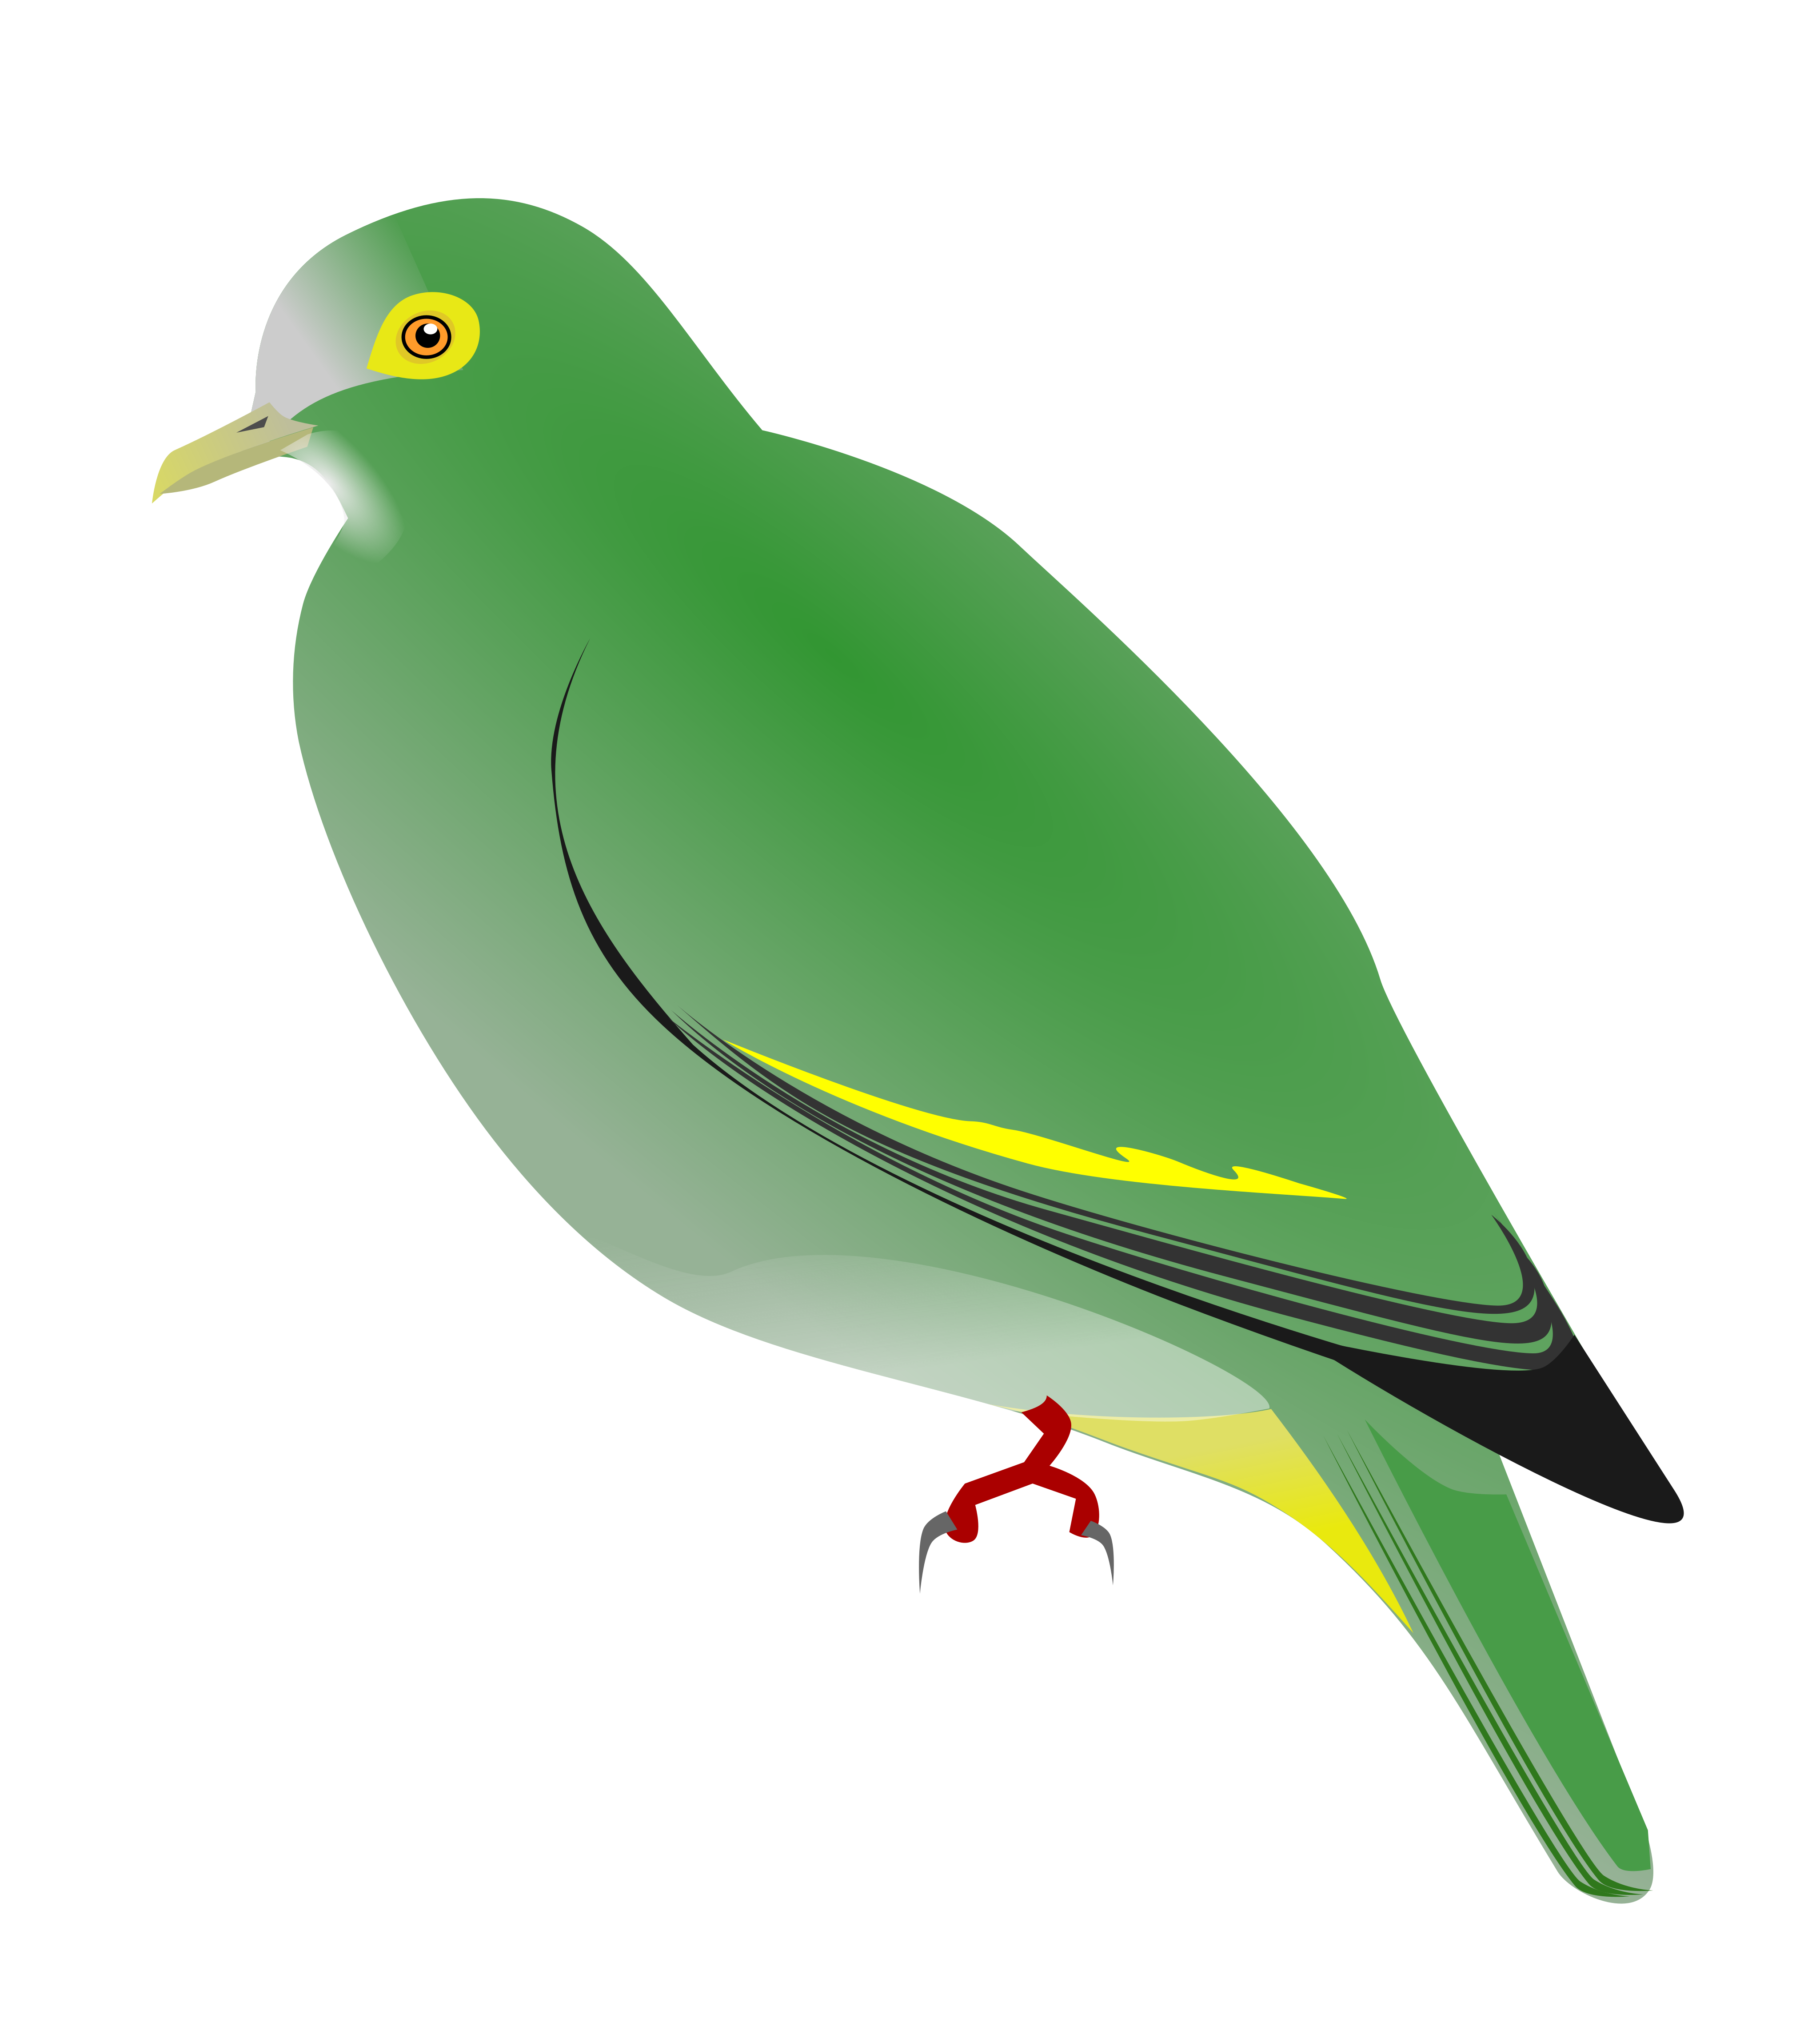 The Spotted Pigeon svg #11, Download drawings